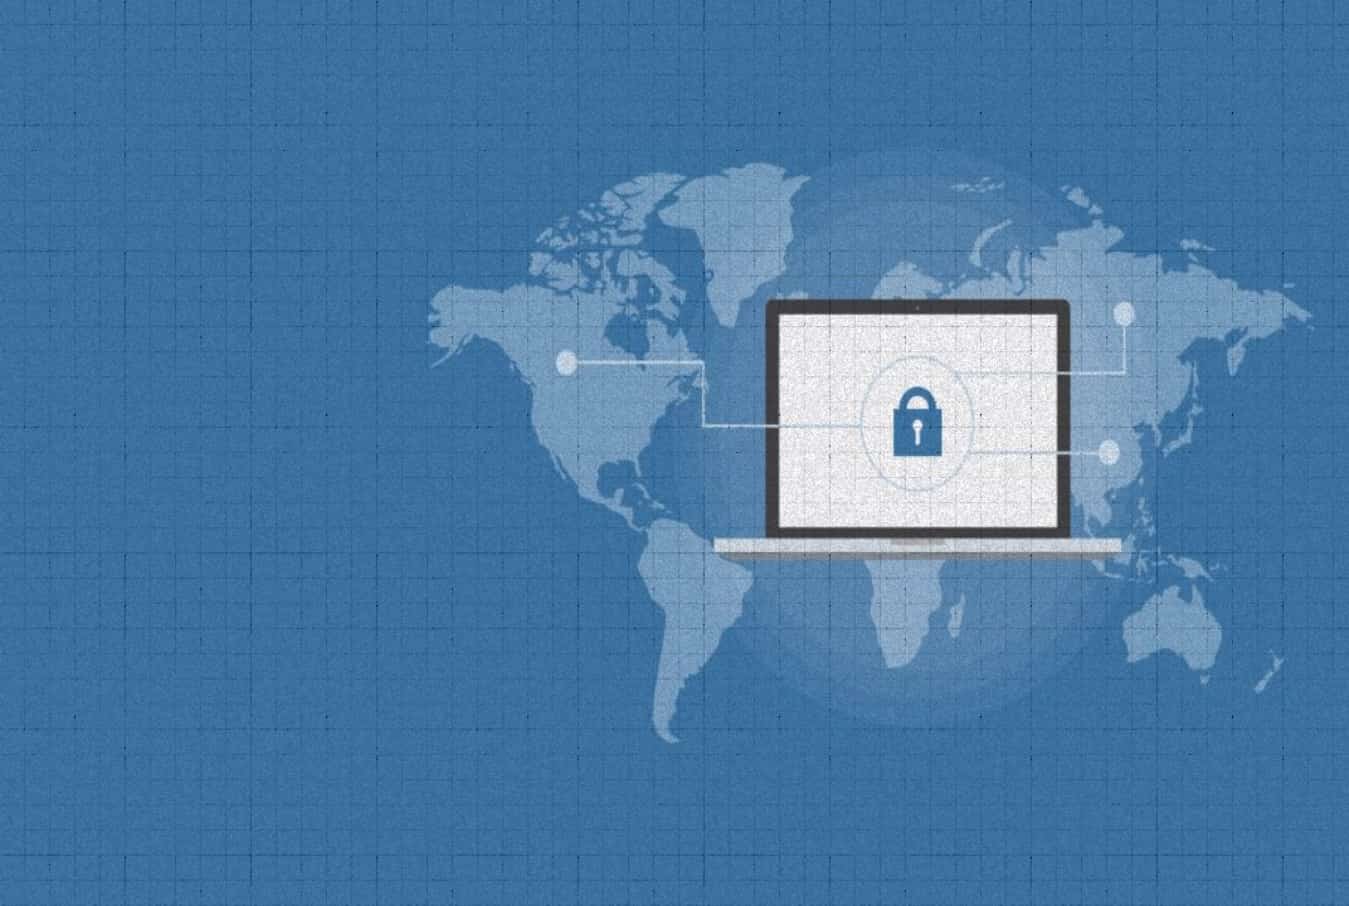 BEST VPN 2019: Do You Really Need It? This Will Help You Decide!